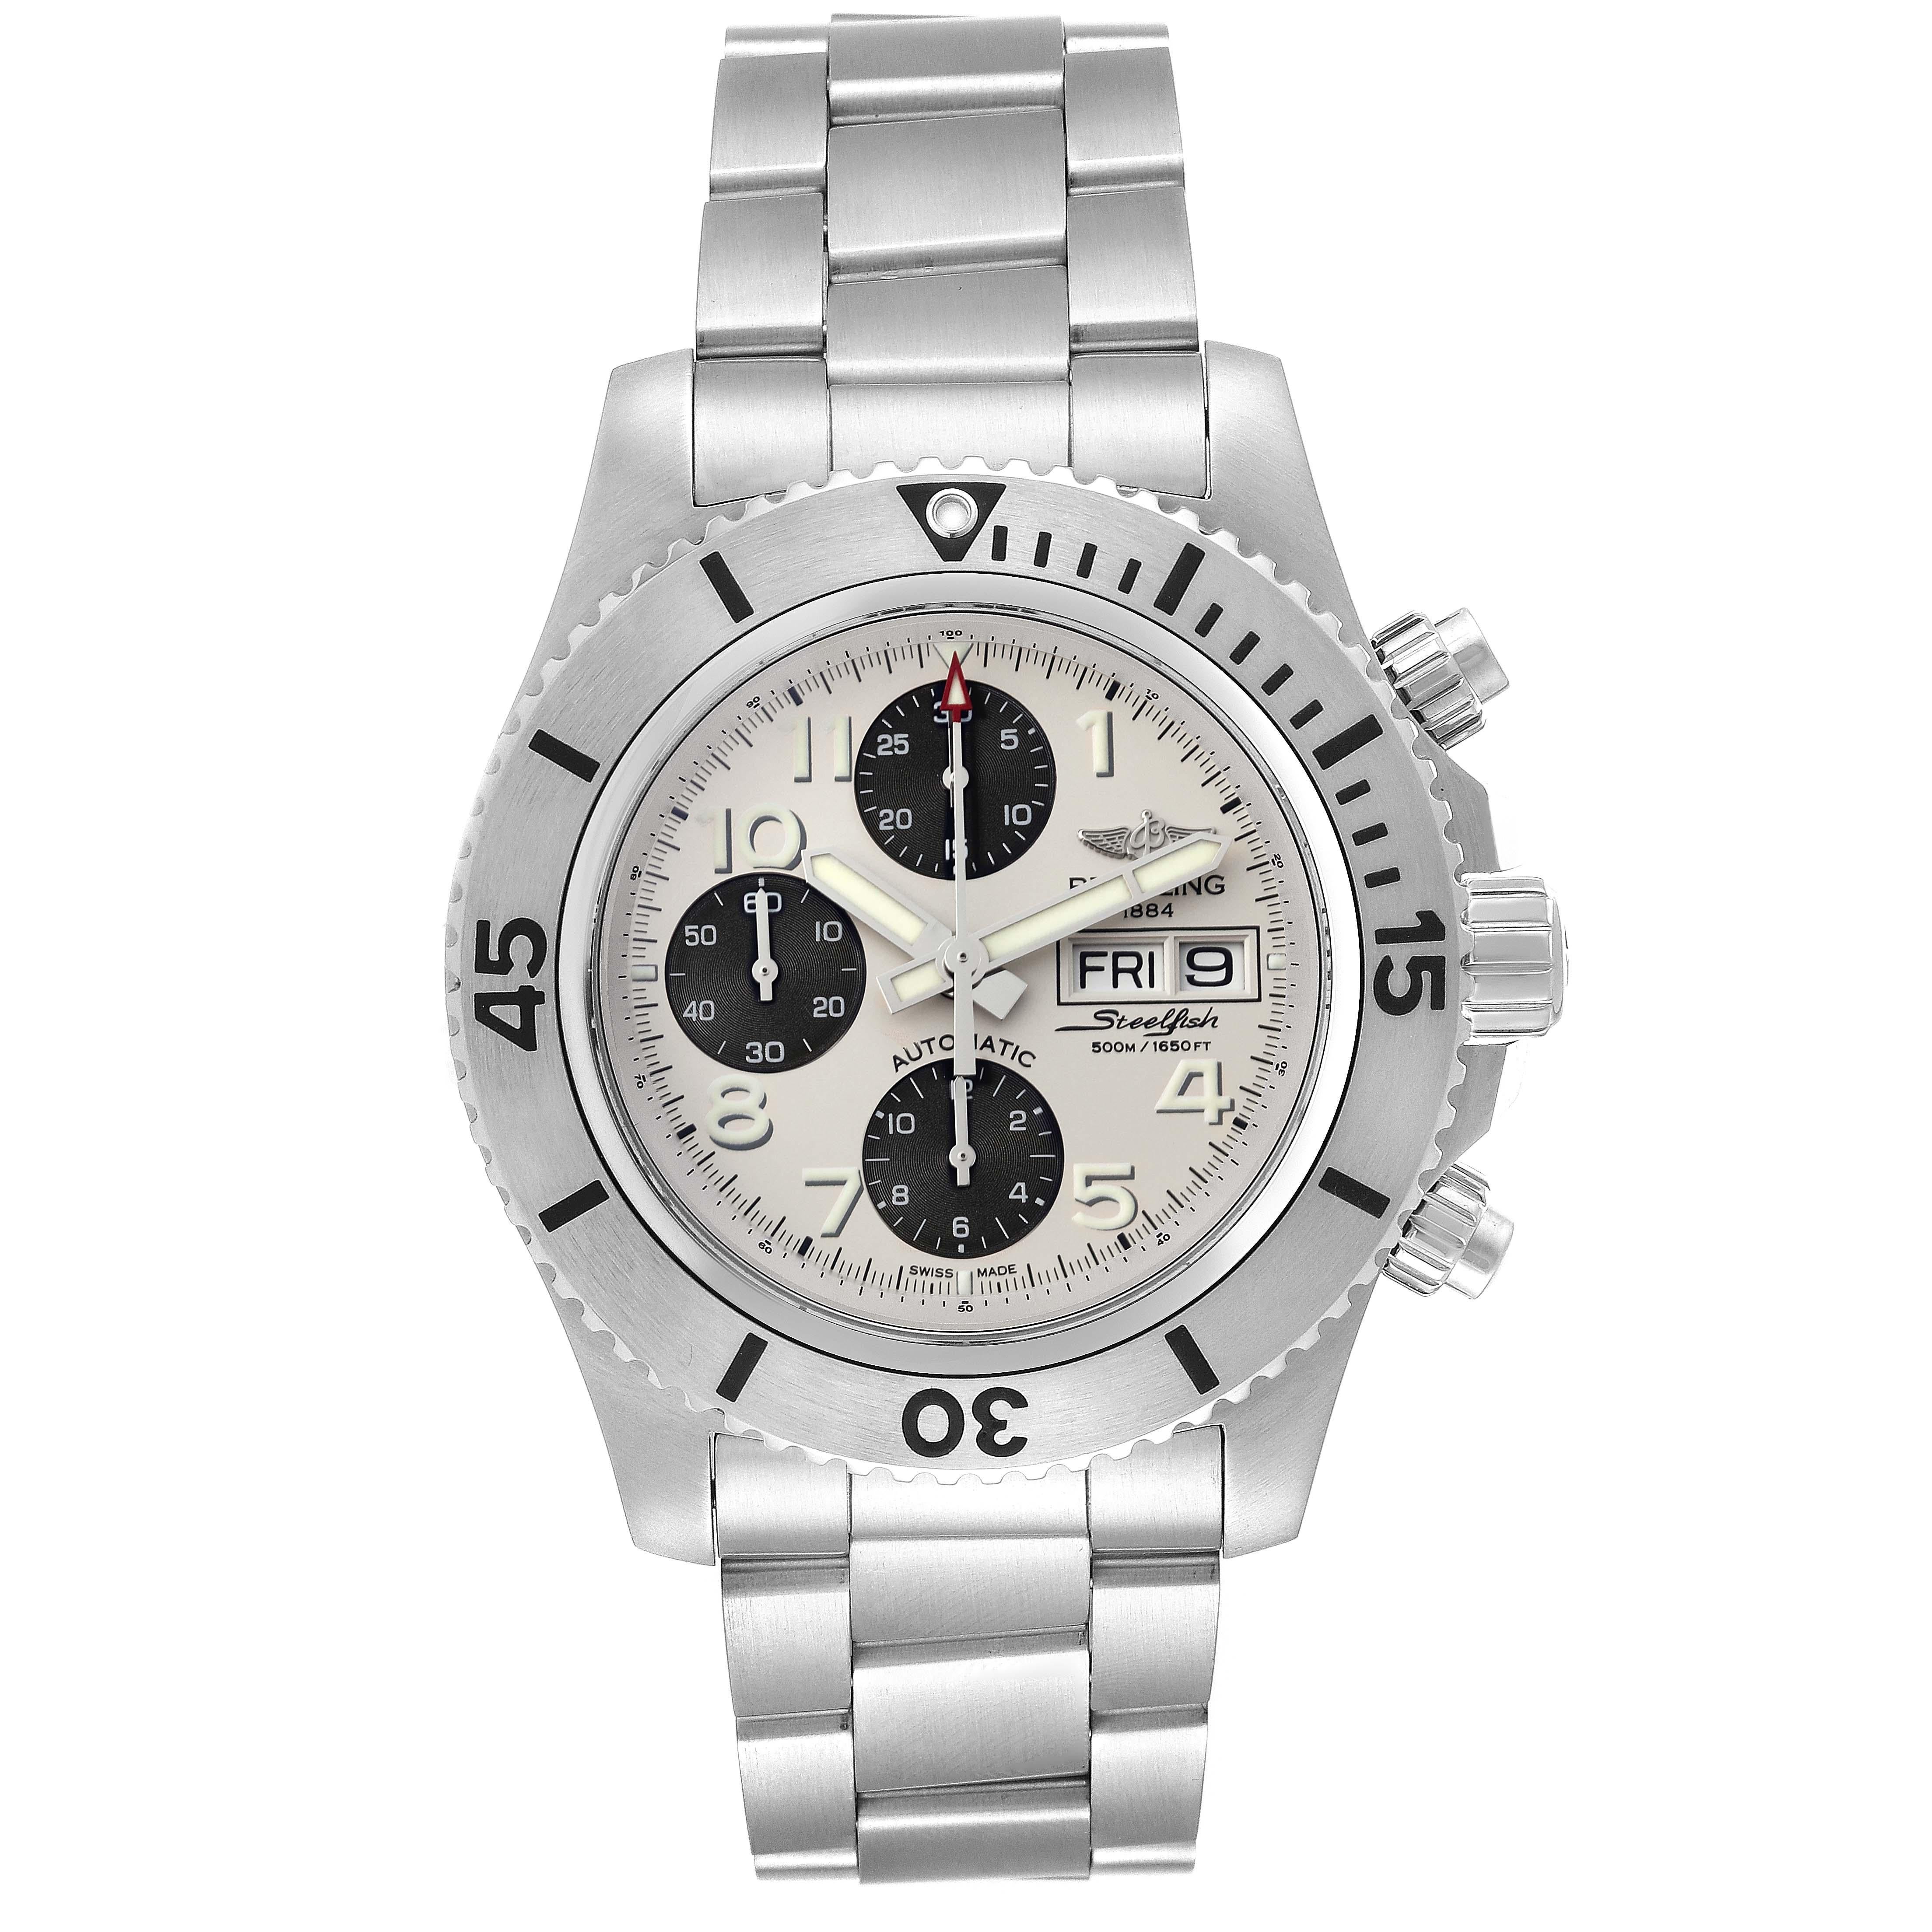 Breitling SuperOcean SteelFish Chronograph Mens Watch A13341 Box Card. Authomatic self-winding chronograph movement. Stainless steel case 44.0 mm in diameter. Stainless steel unidirectional revolving bezel. Scratch resistant sapphire crystal.